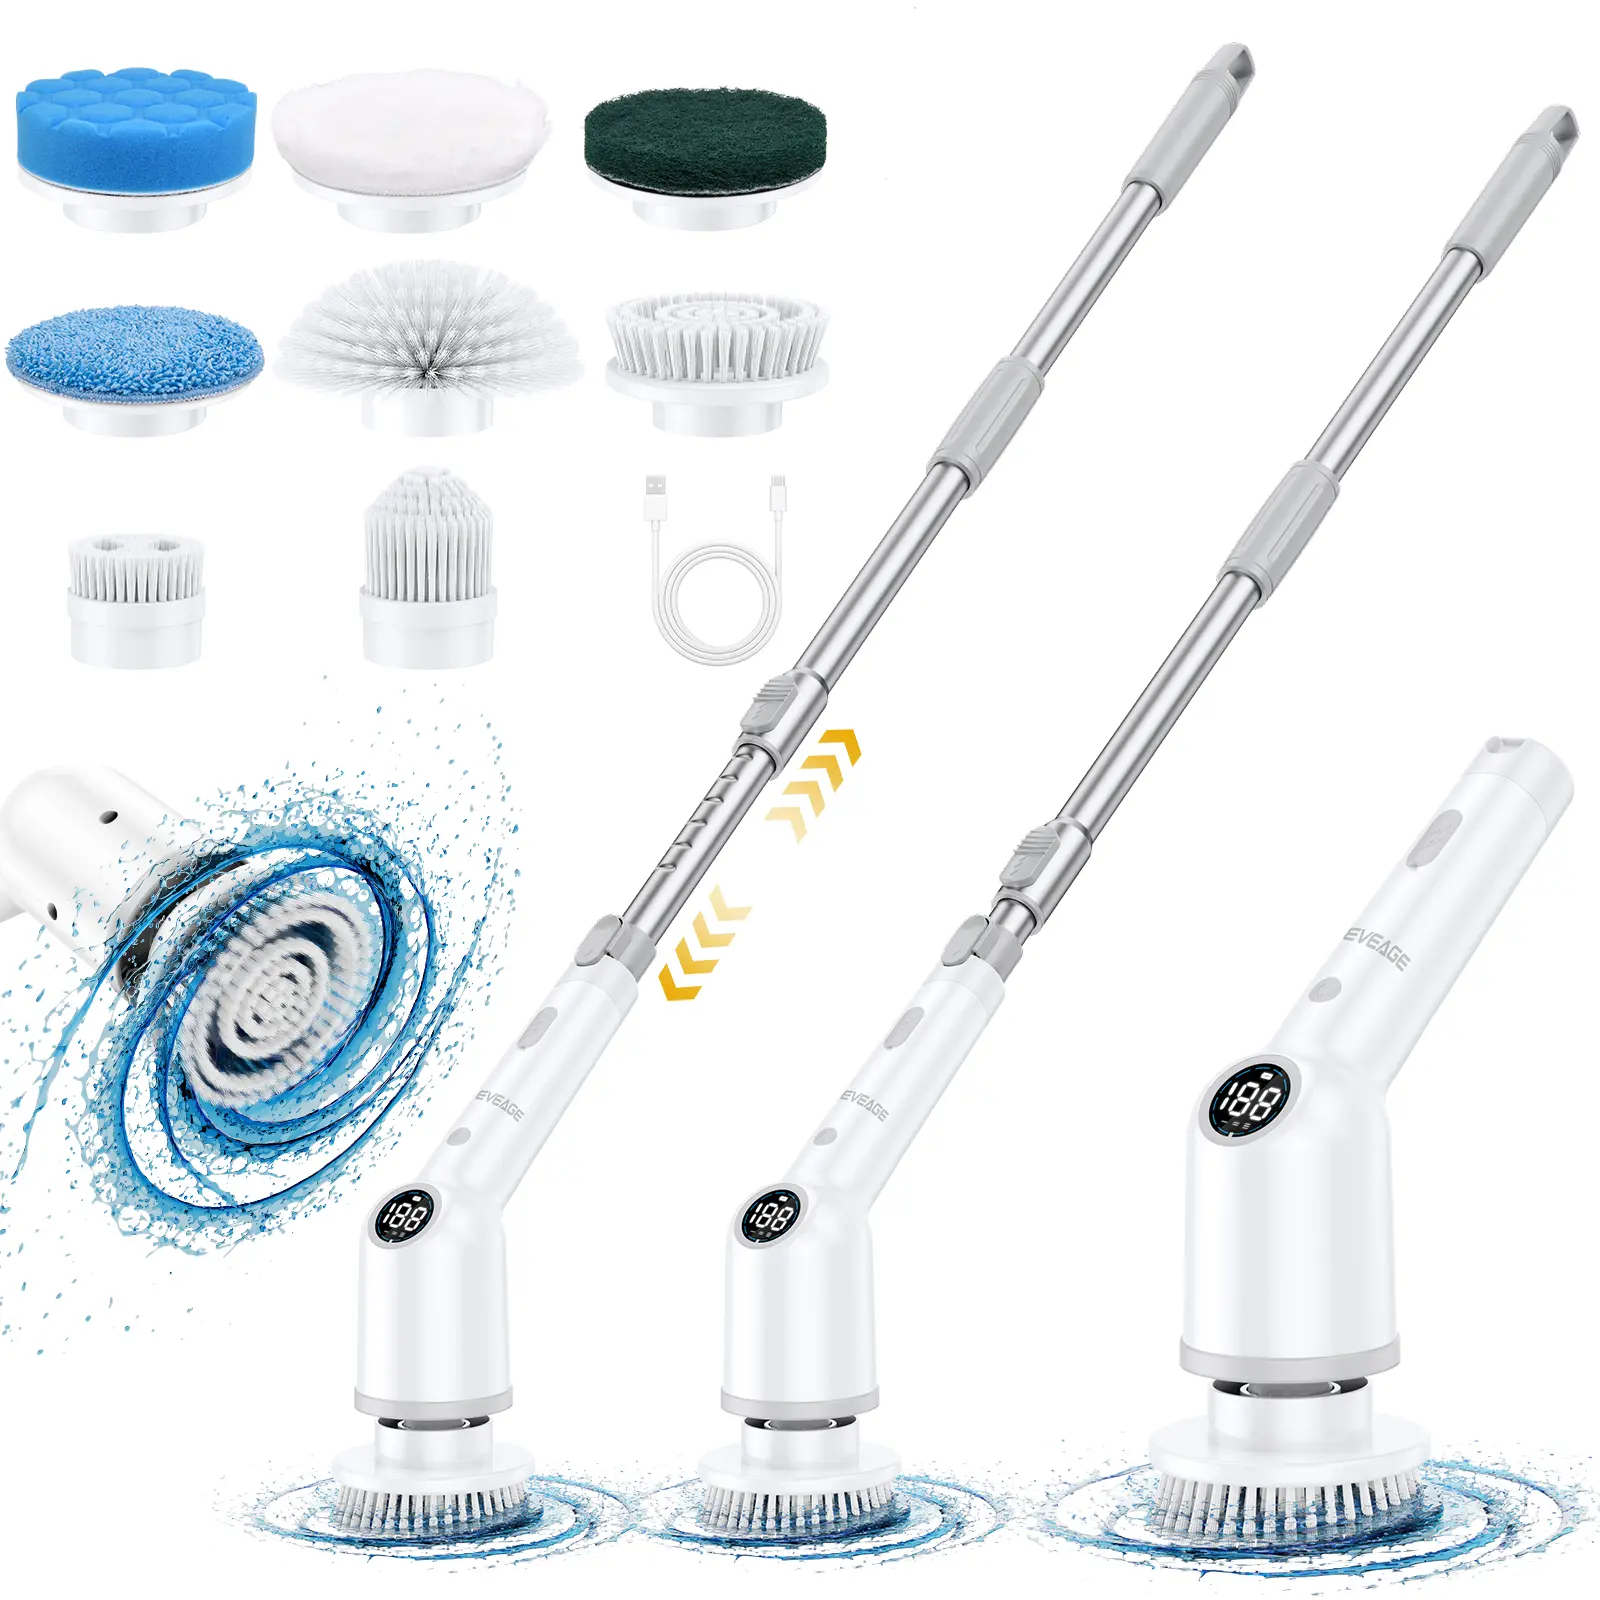 Get This Electric Spin Scrubber on Sale